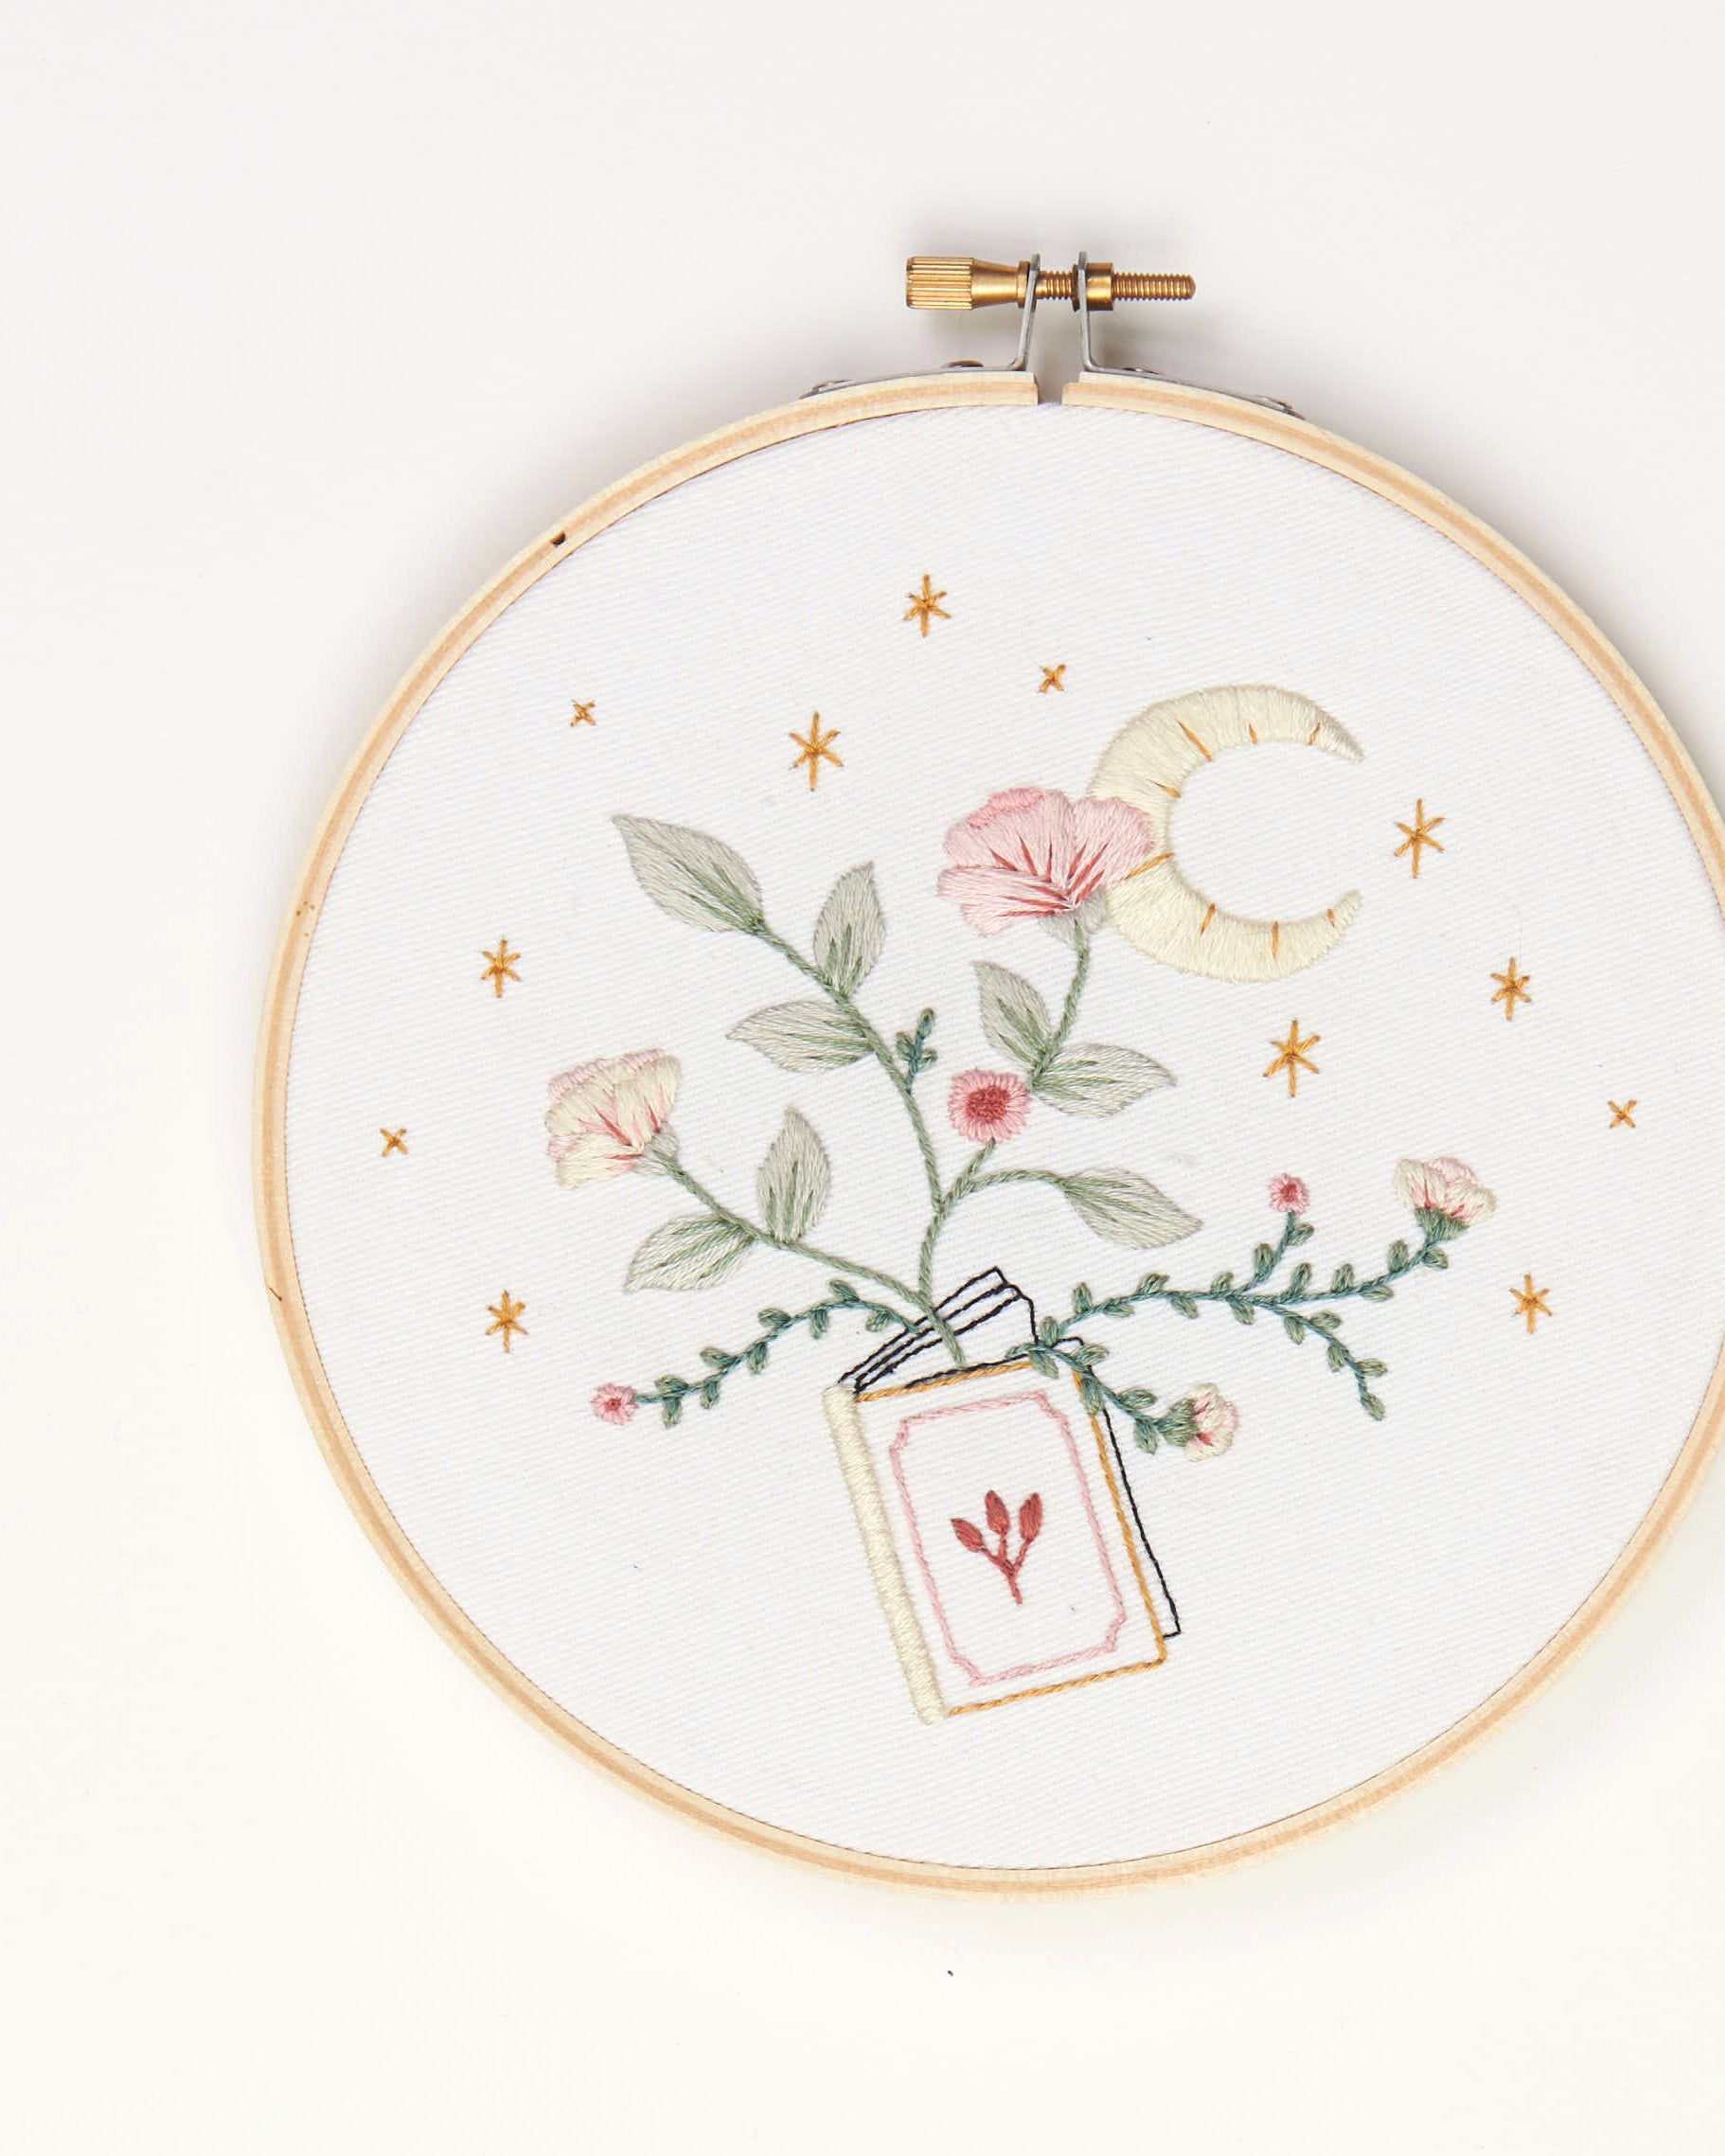 Bloom Anyways Floral Heart Embroidery Pattern – Emily June